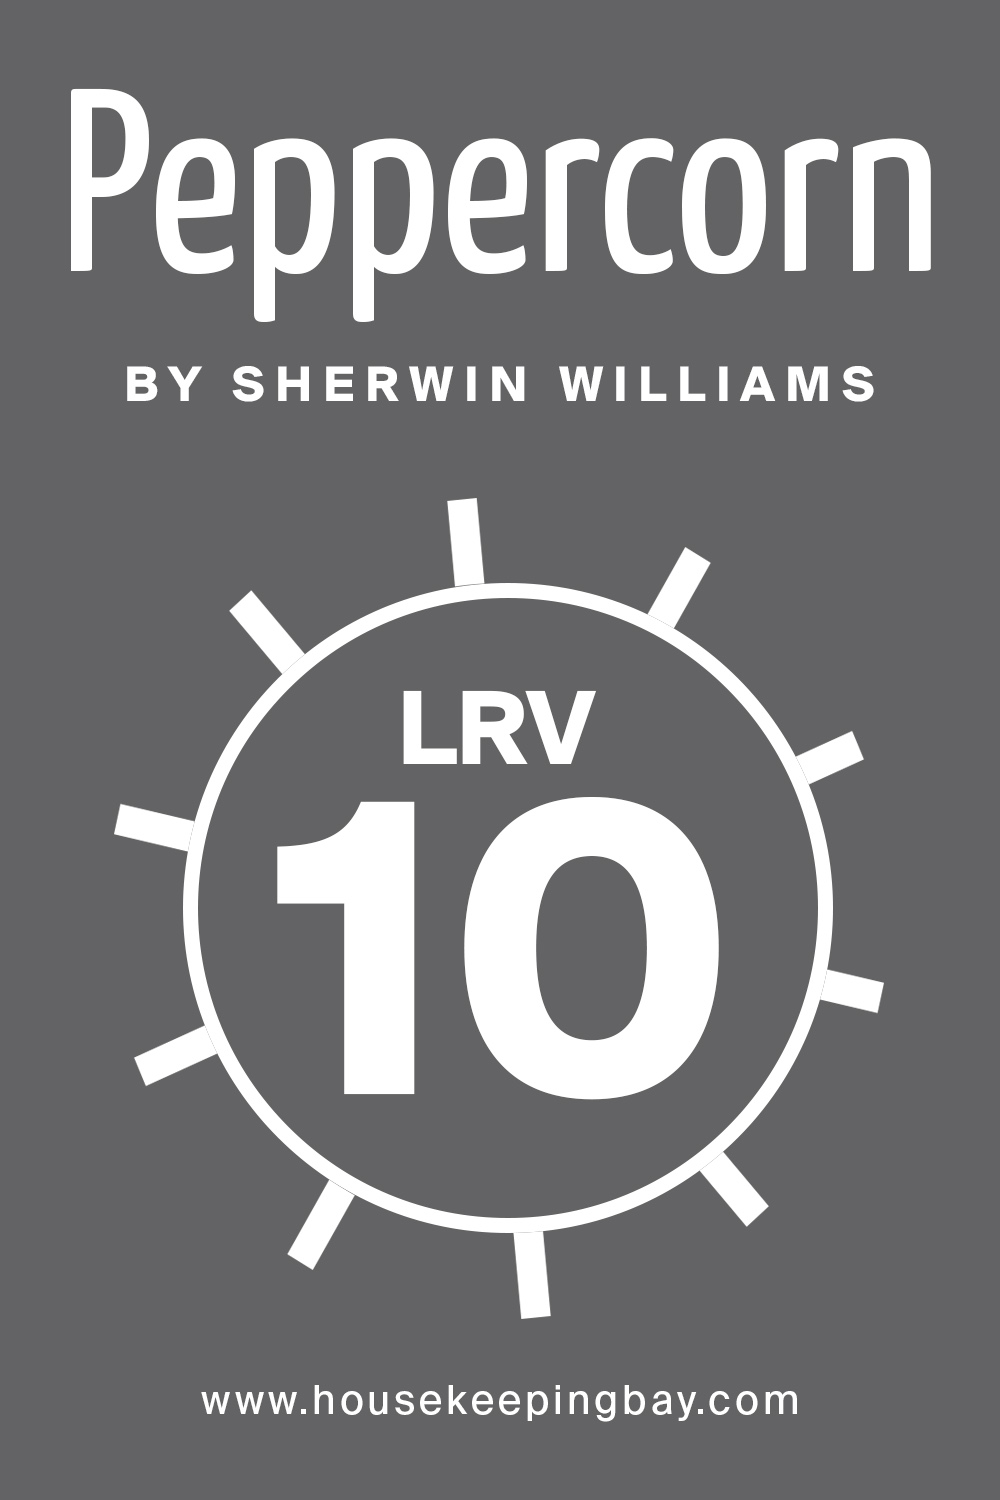 peppercon by sherwin williams LRV